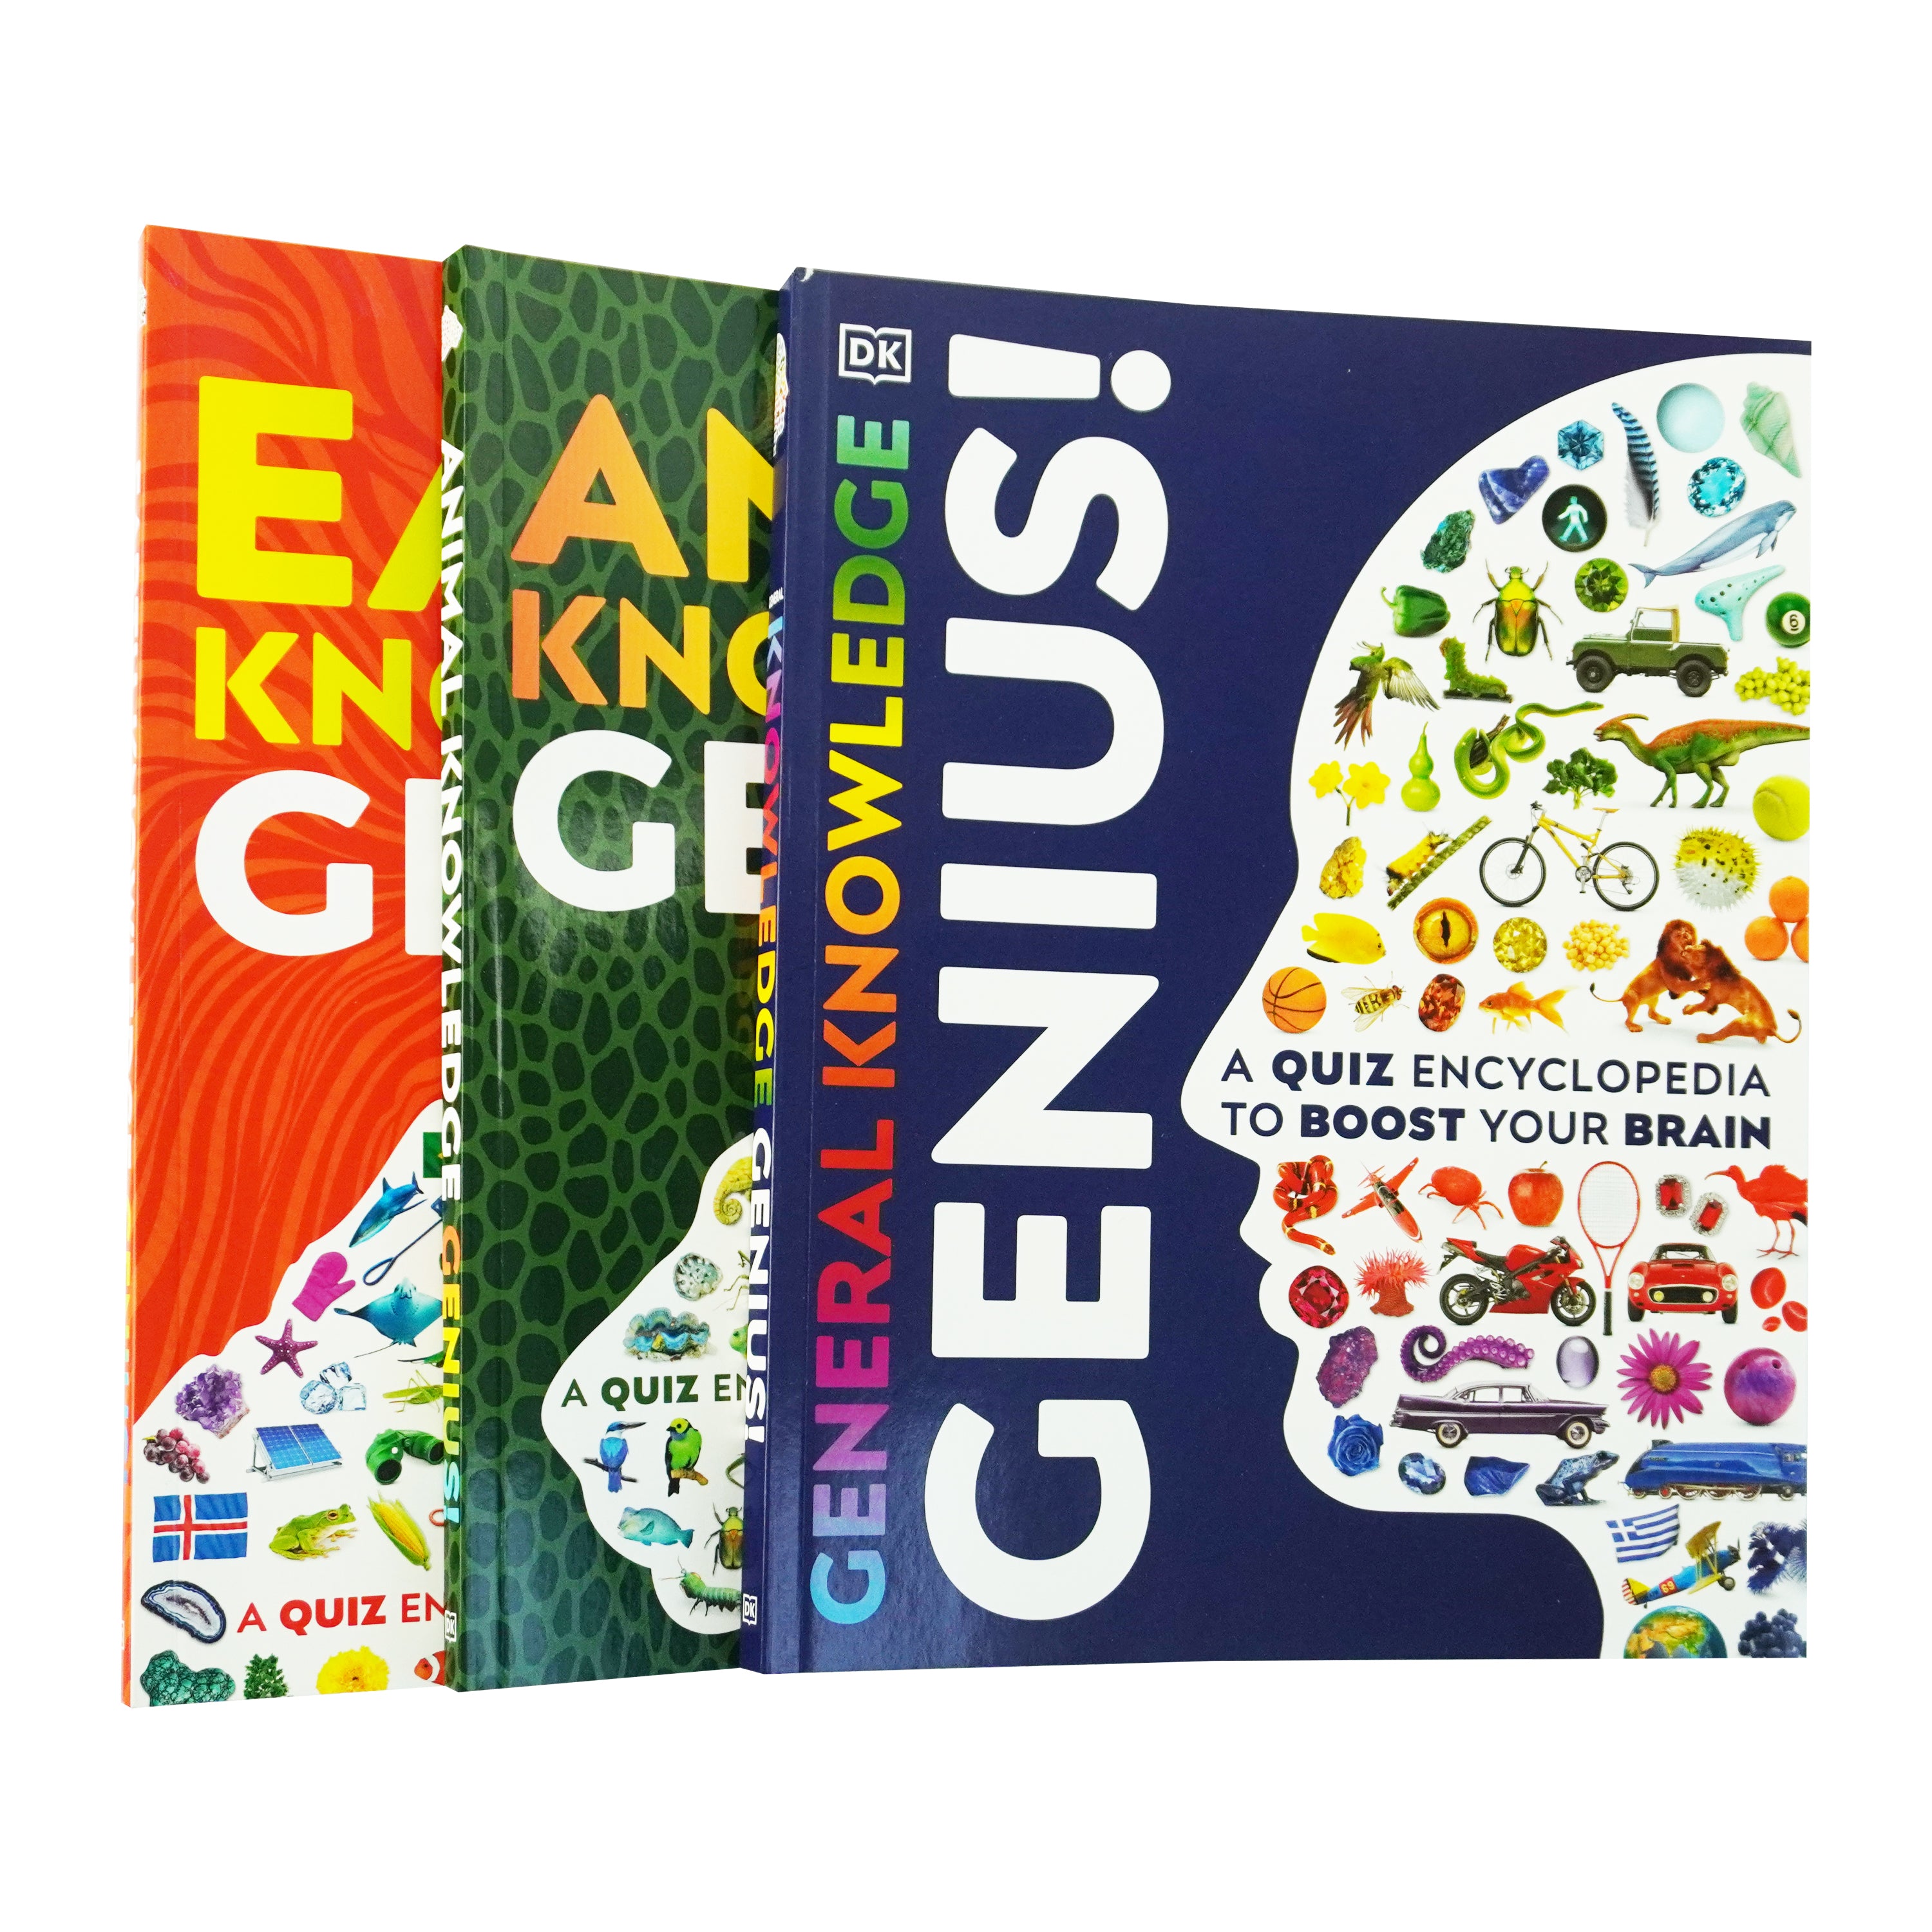 A Quiz Encyclopedia to Boost Your Brain General Knowledge Series by DK: 3 Books Collection Set - Ages 9-12 - Paperback